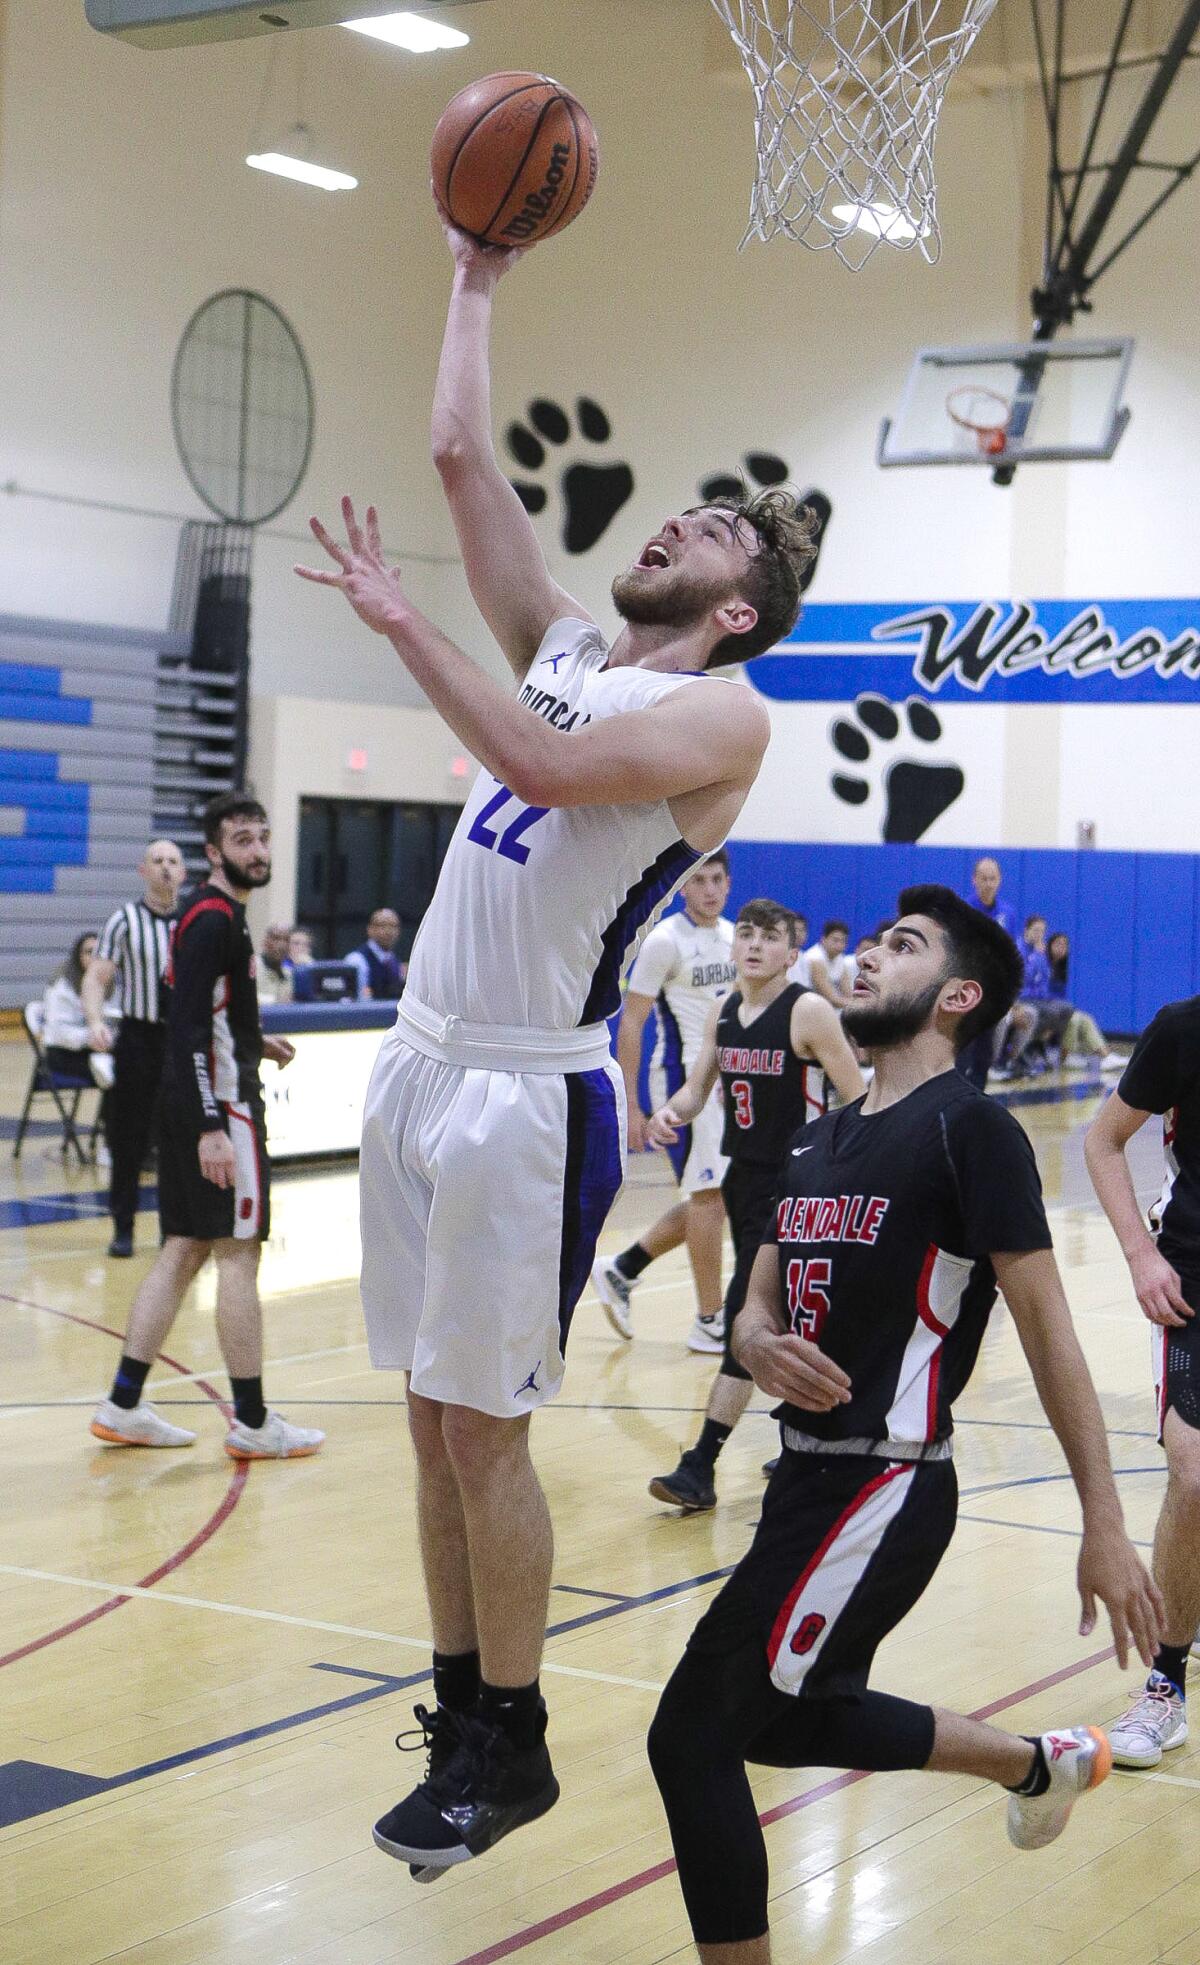 Burbank's Kelton Shea gets under the basket for a reverse layup against Glendale's Chance Snoody in a Pacific League boys' basketball game at Burbank High School on Friday, January 17, 2020.